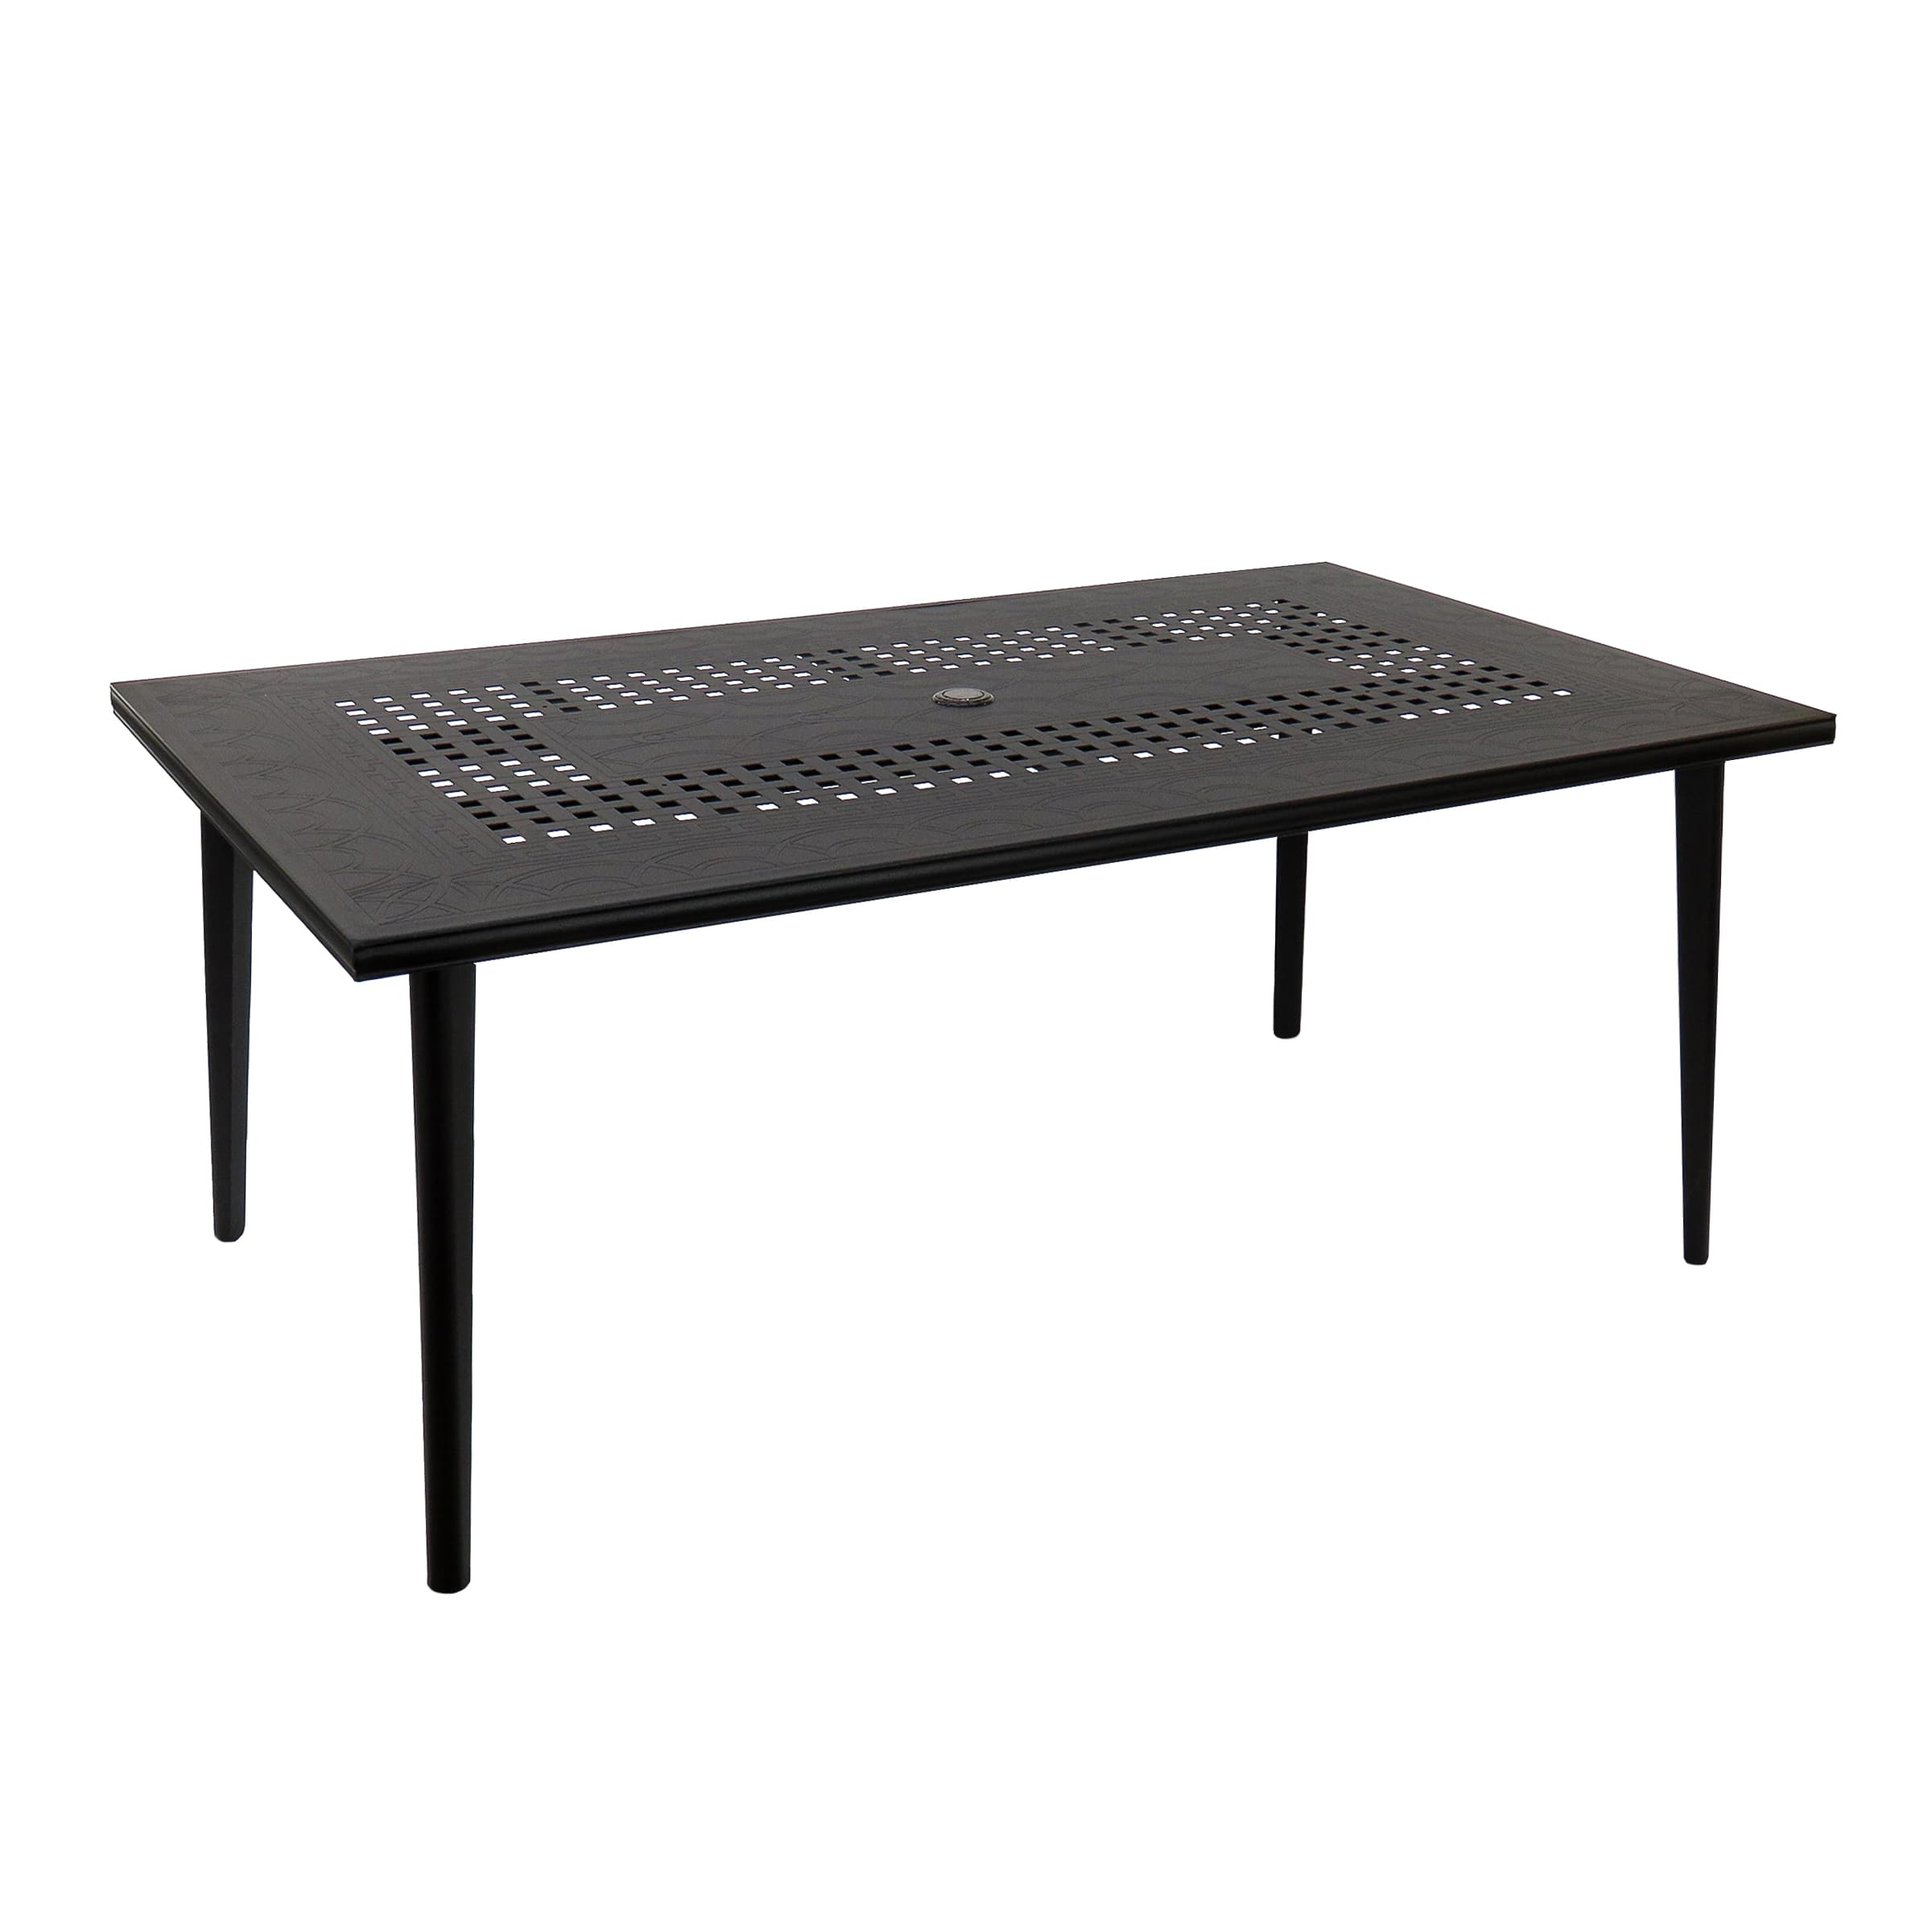 Darby Collection All-Weather Dining Table